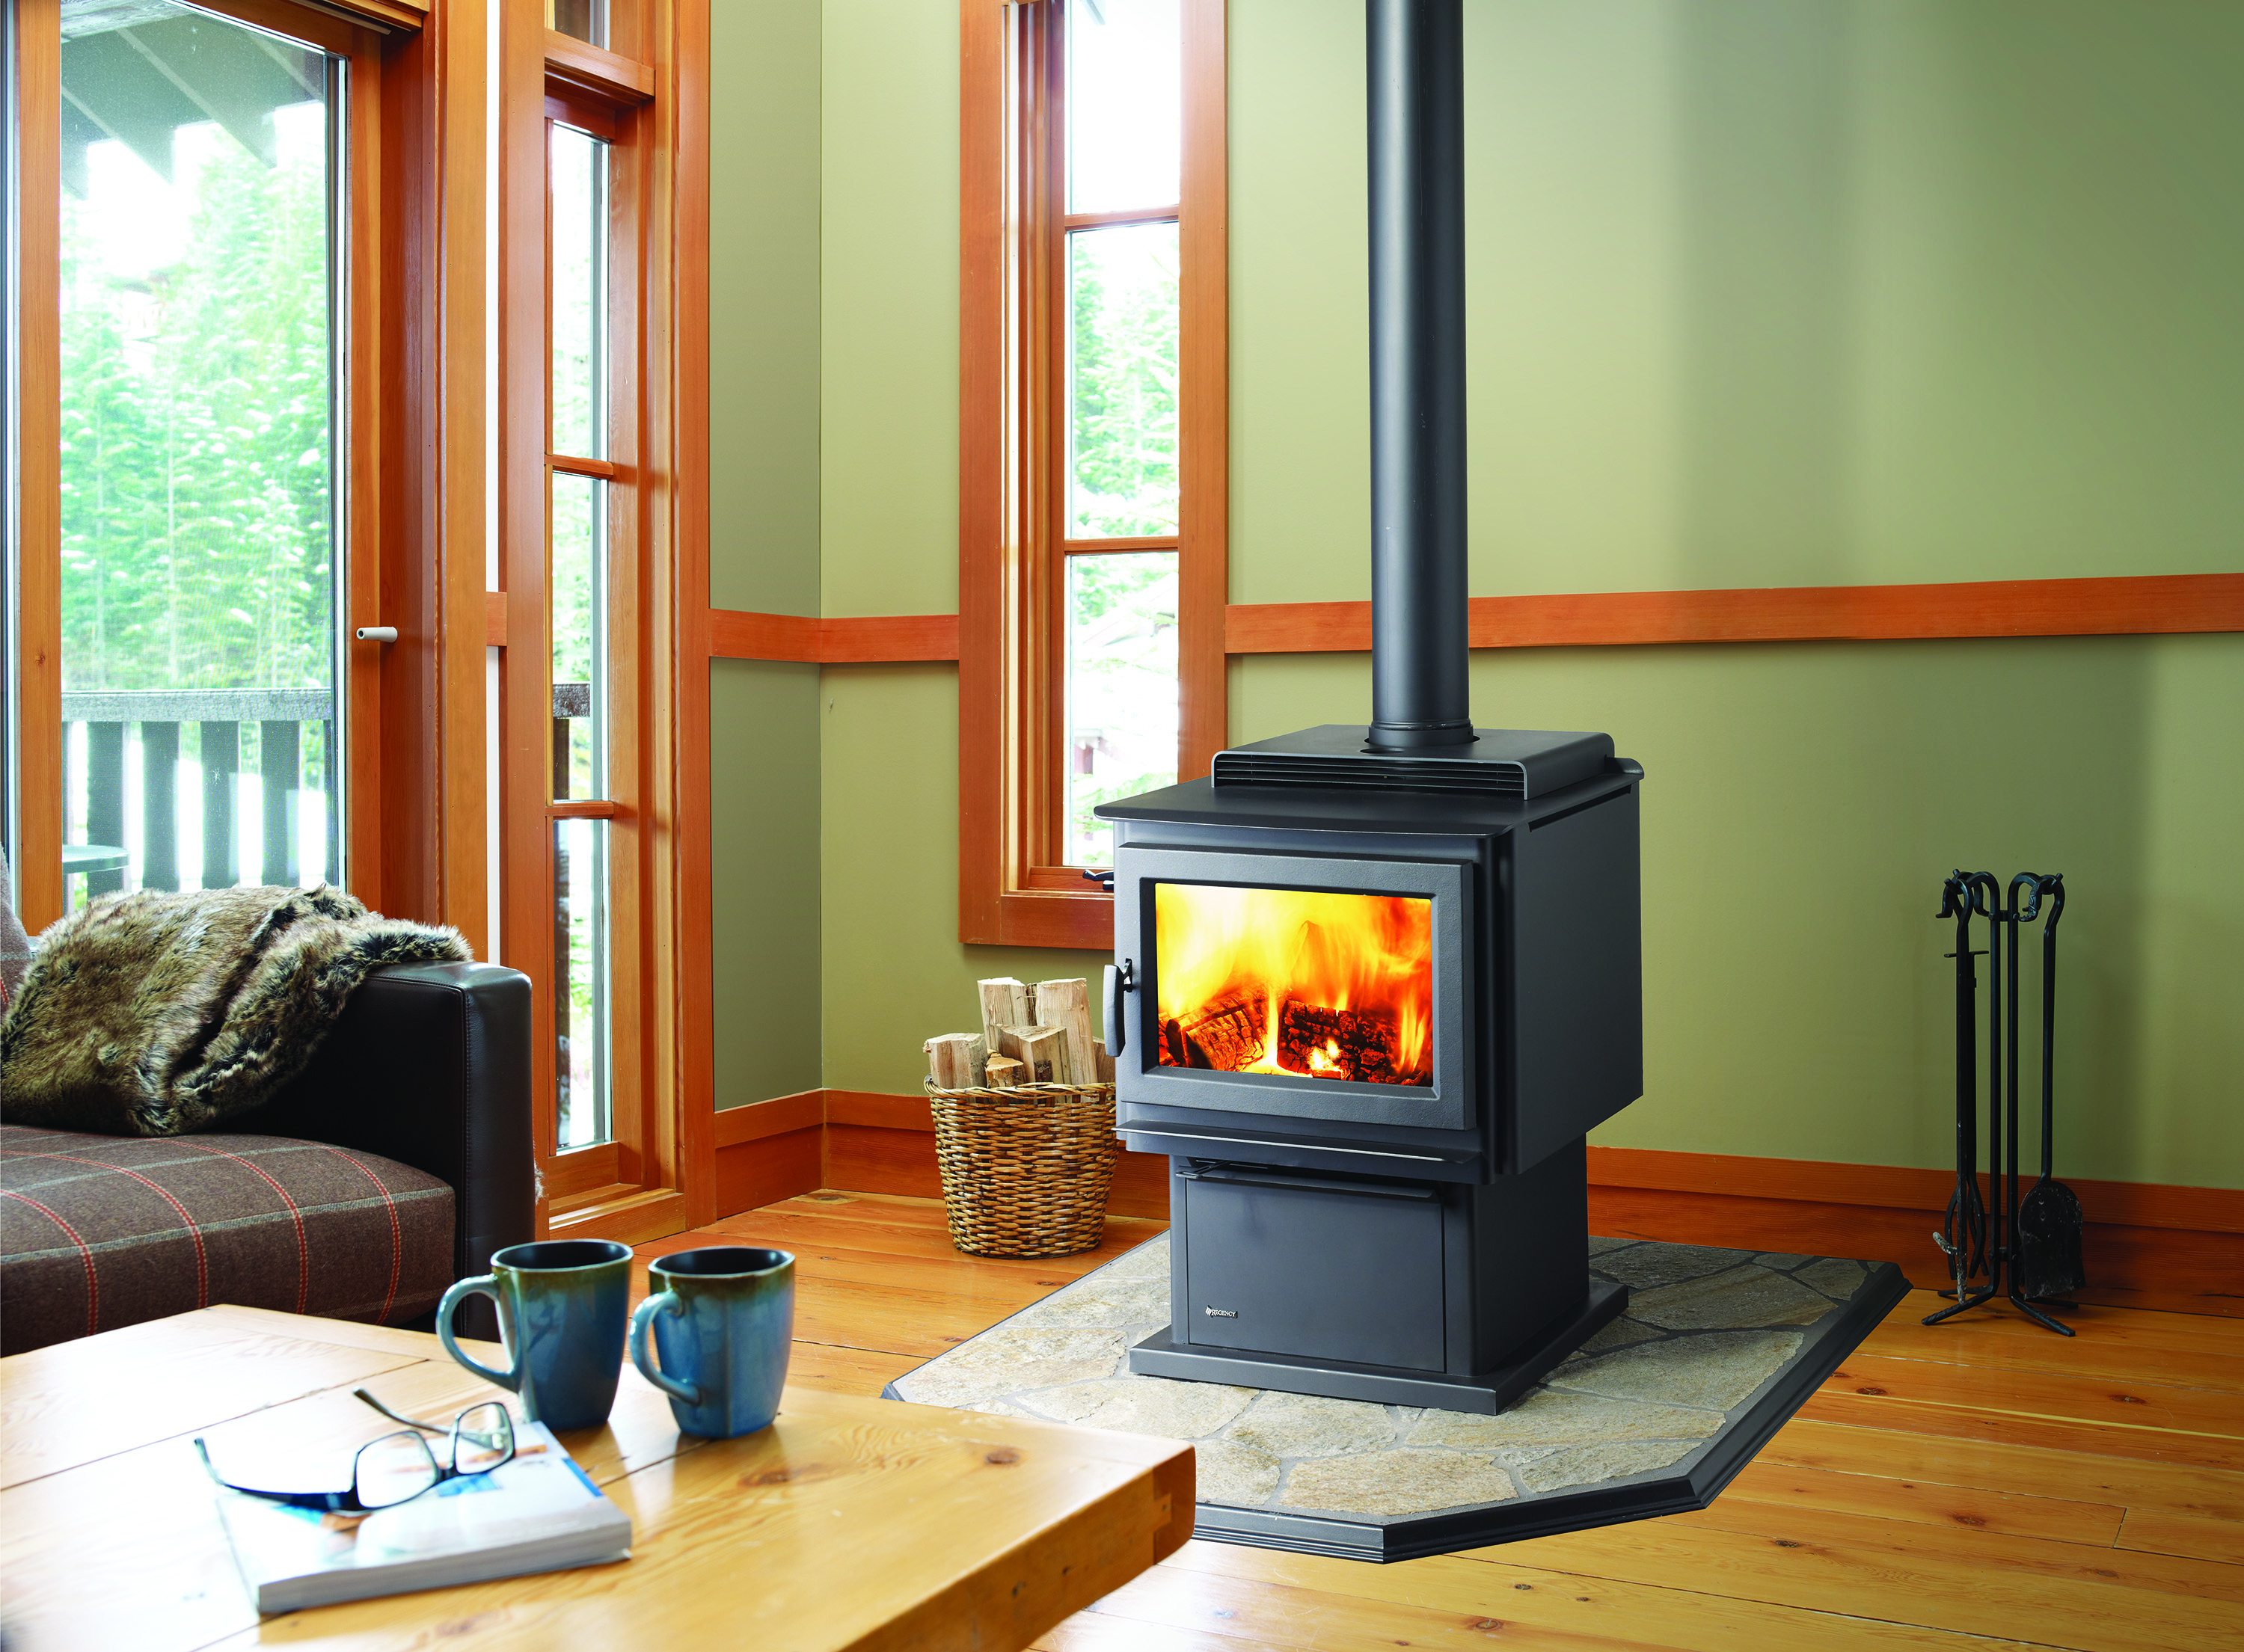 installing-a-wood-burning-stove-in-an-existing-fireplace-software-free